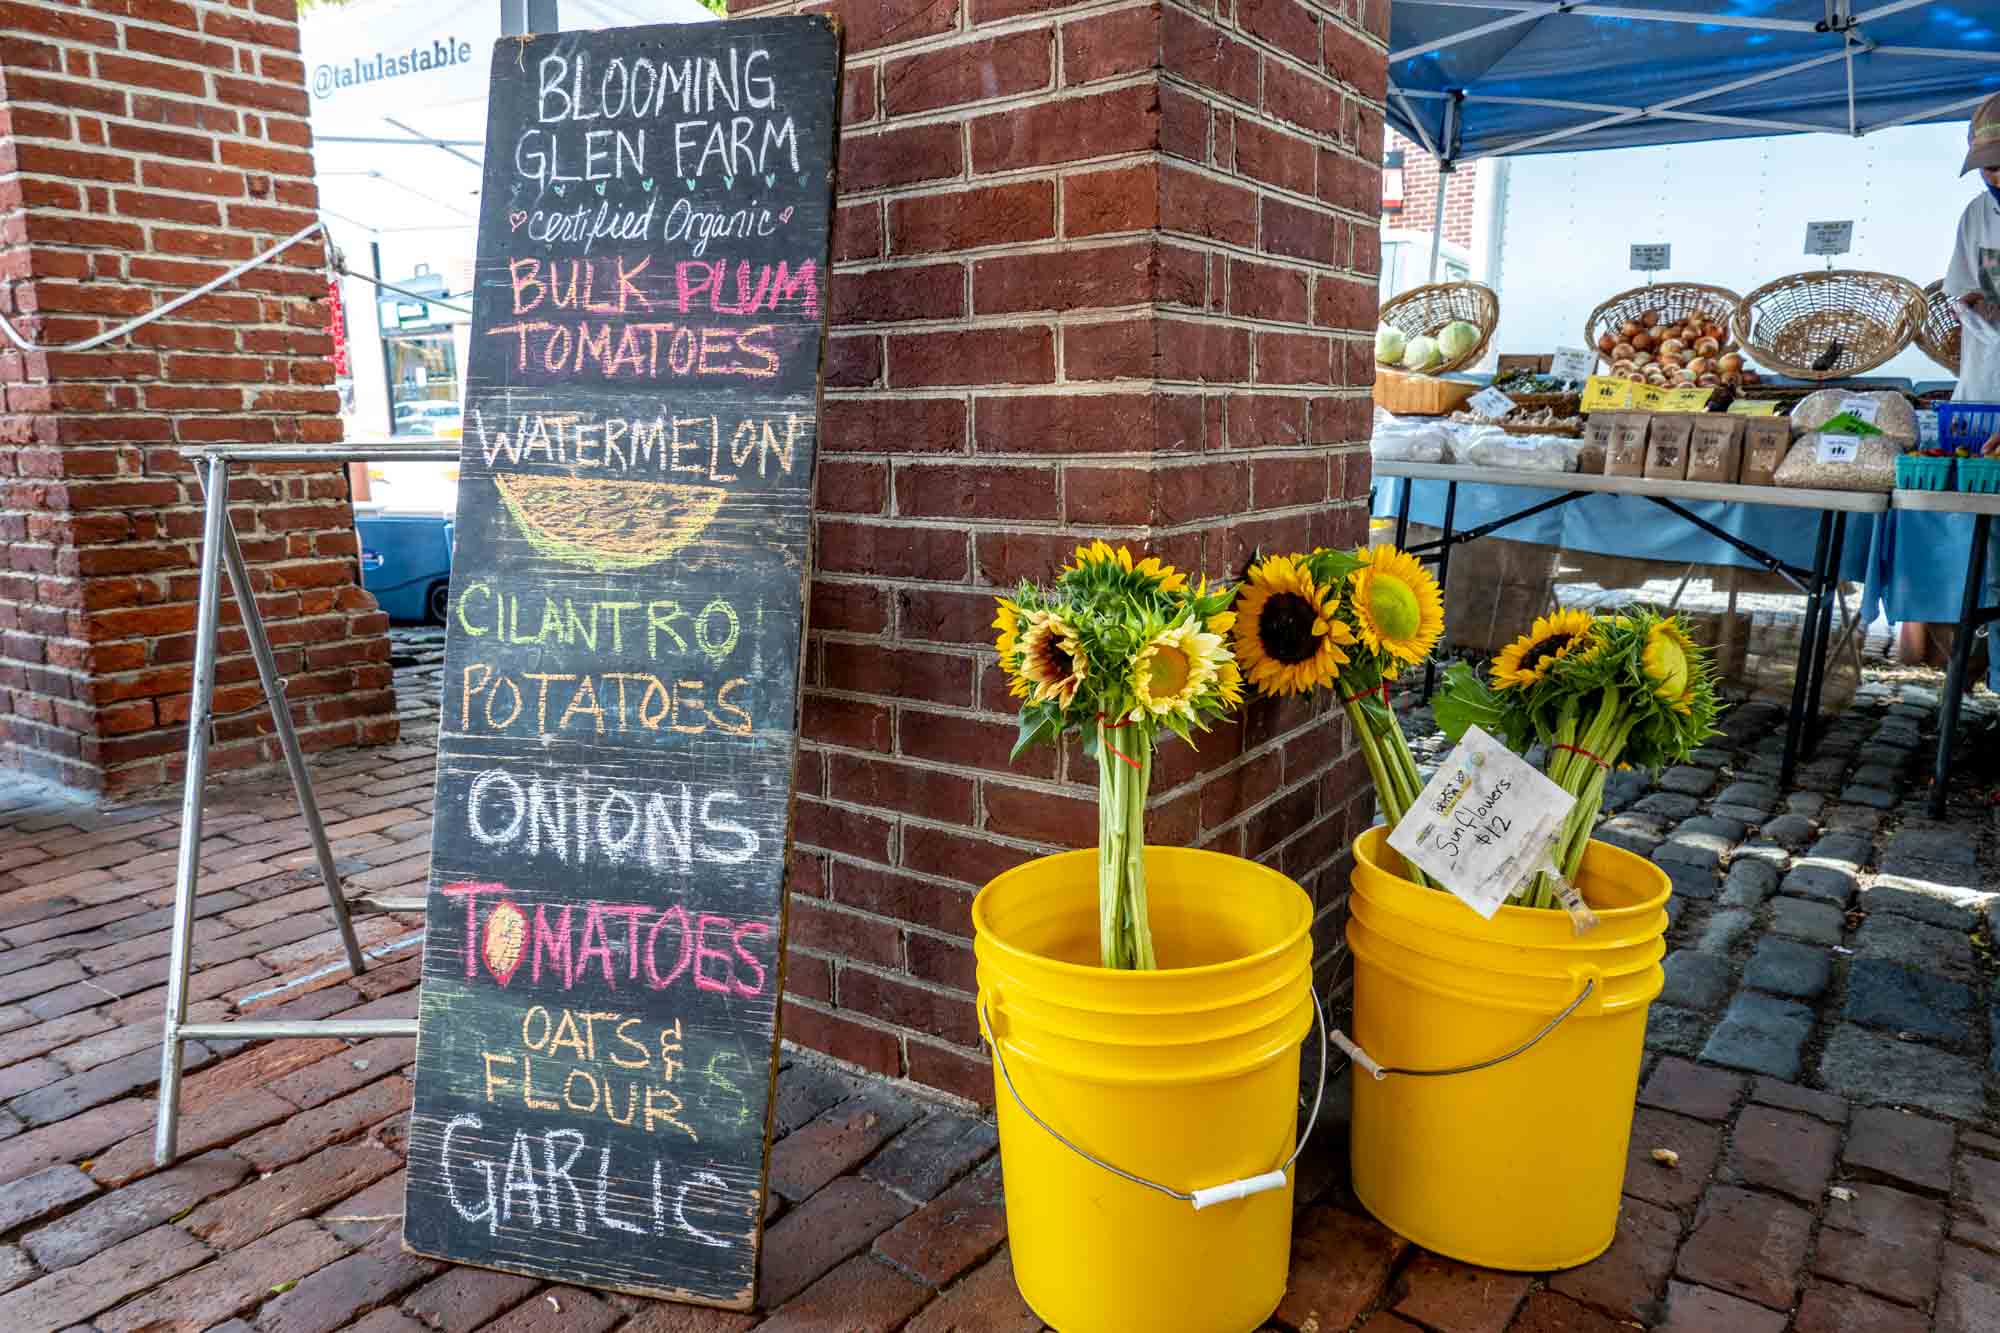 Yellow buckets of sunflowers next to a board offering fresh vegetables at an outdoor market